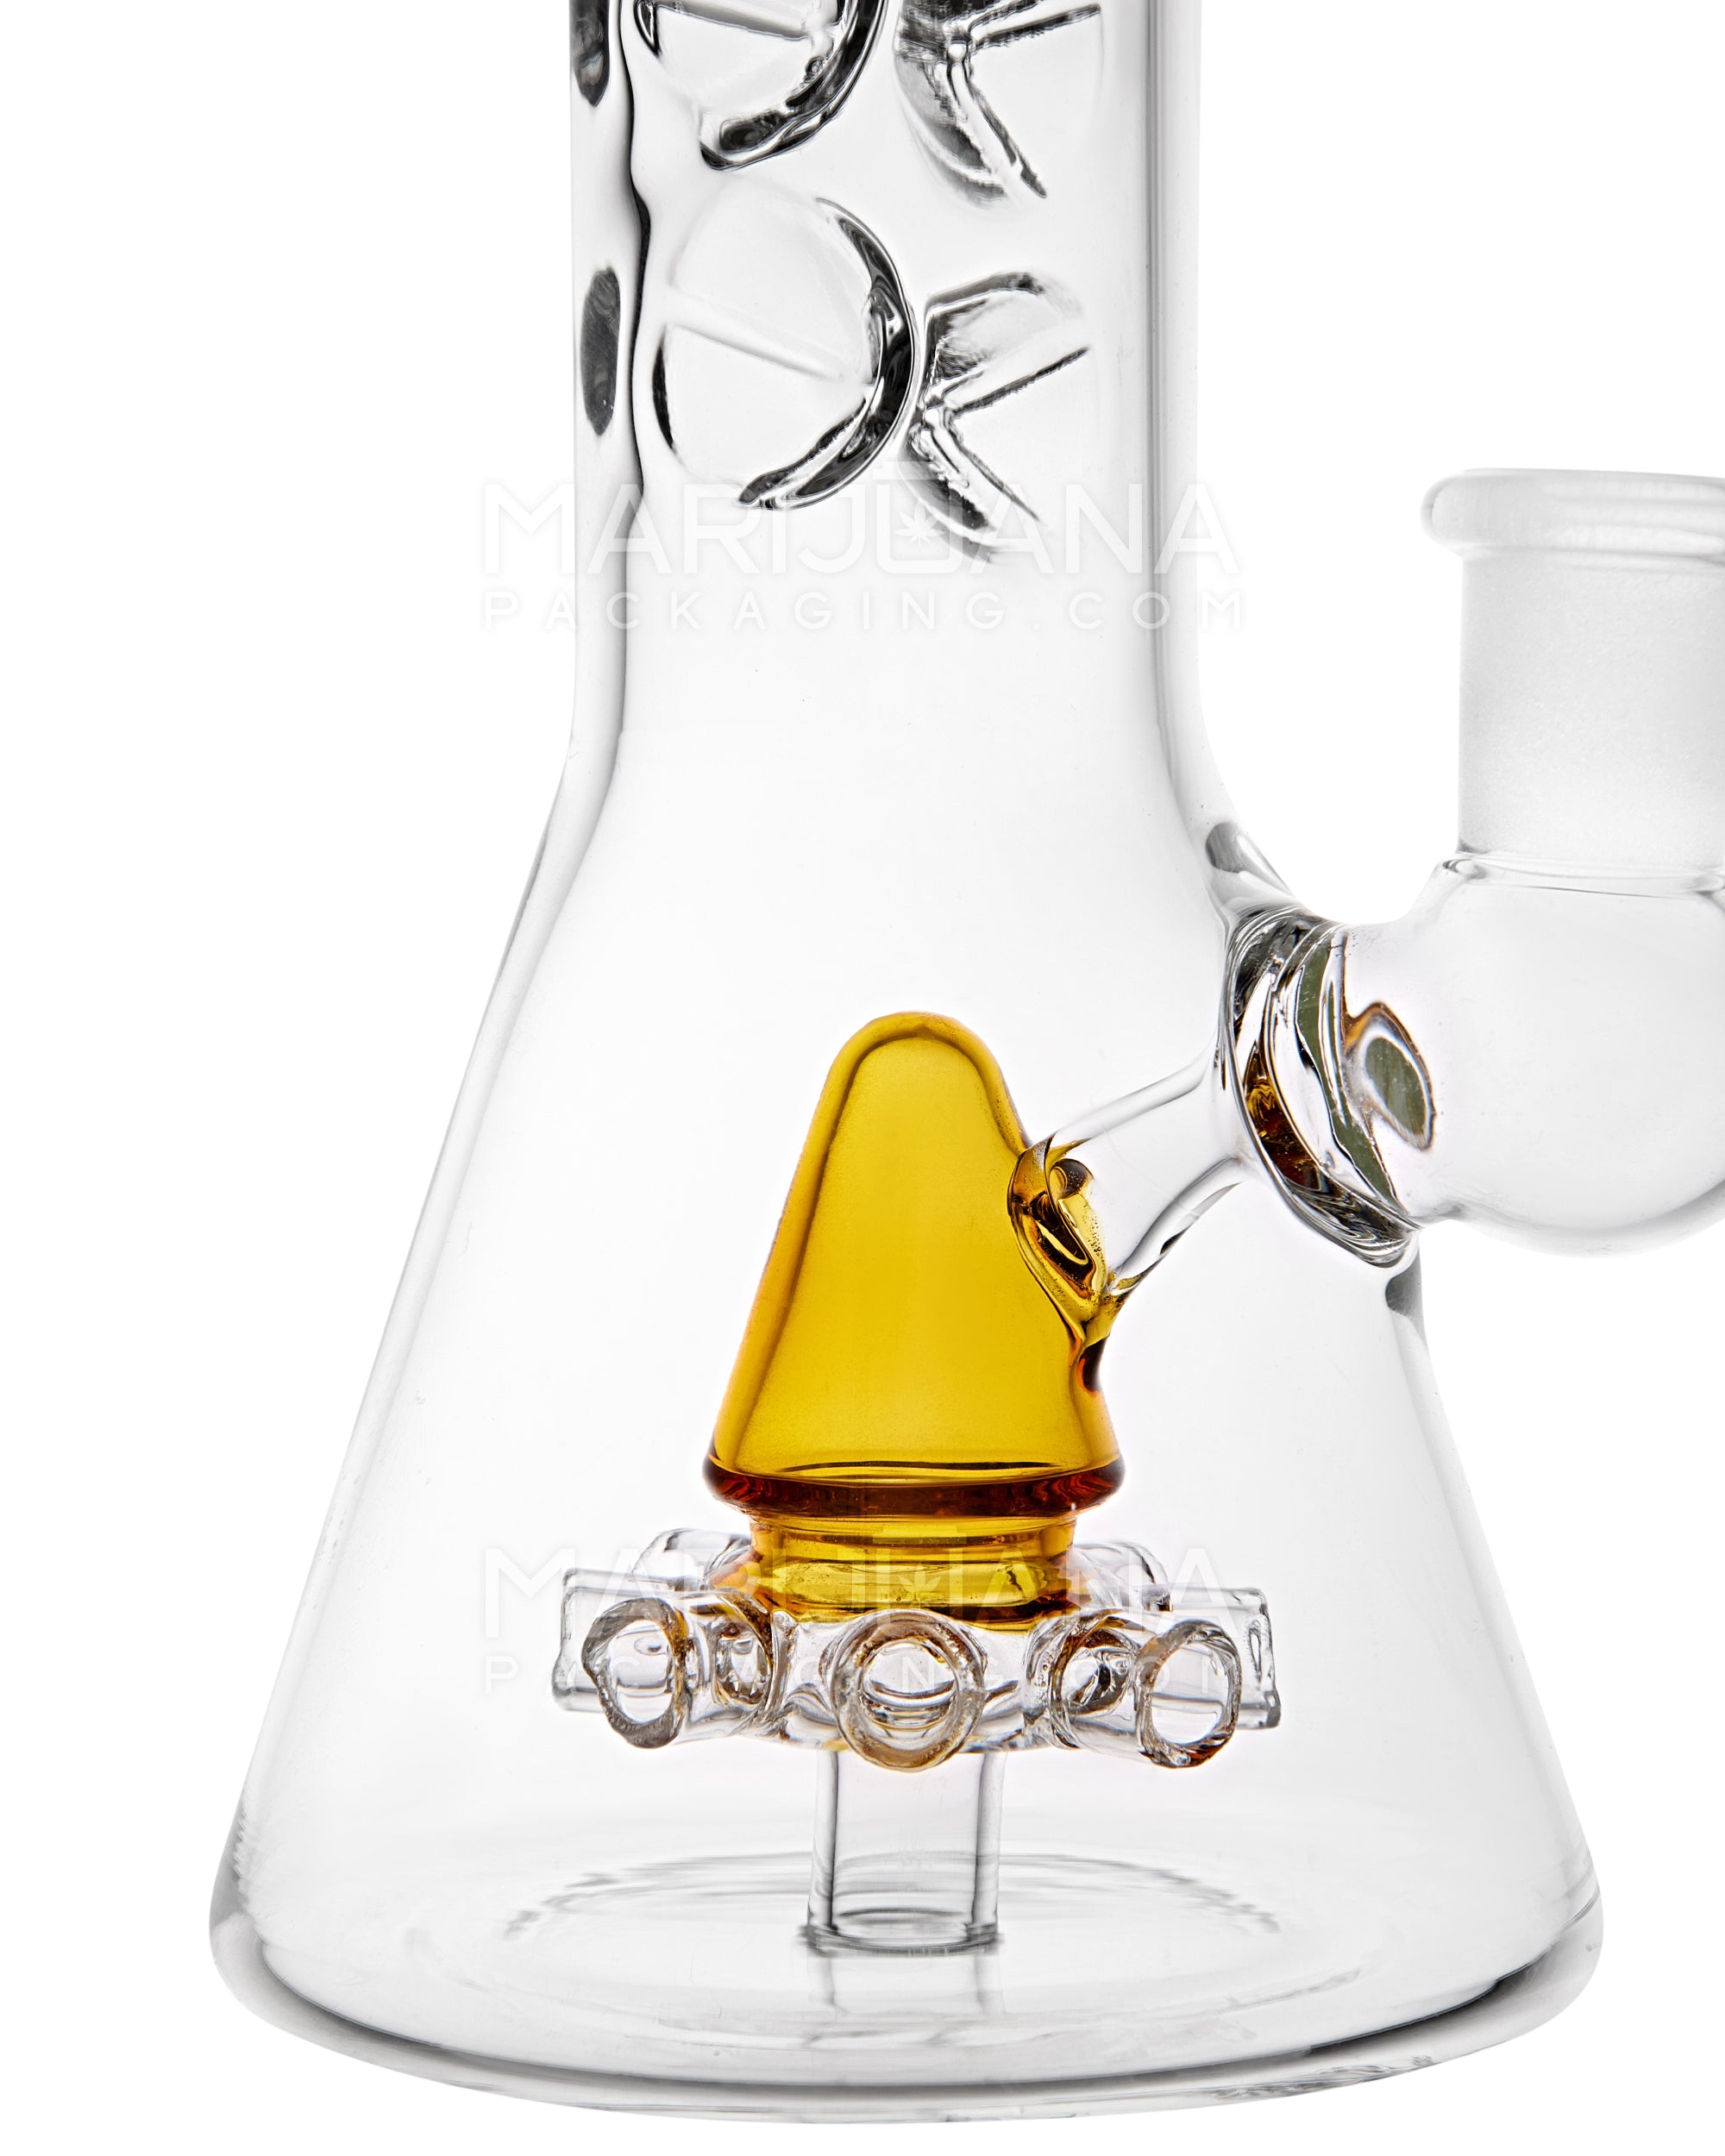 Straight Neck Atomic Perc Glass Beaker Water Pipe w/ Ice Catcher | 10in Tall - 14mm Bowl - Amber - 3